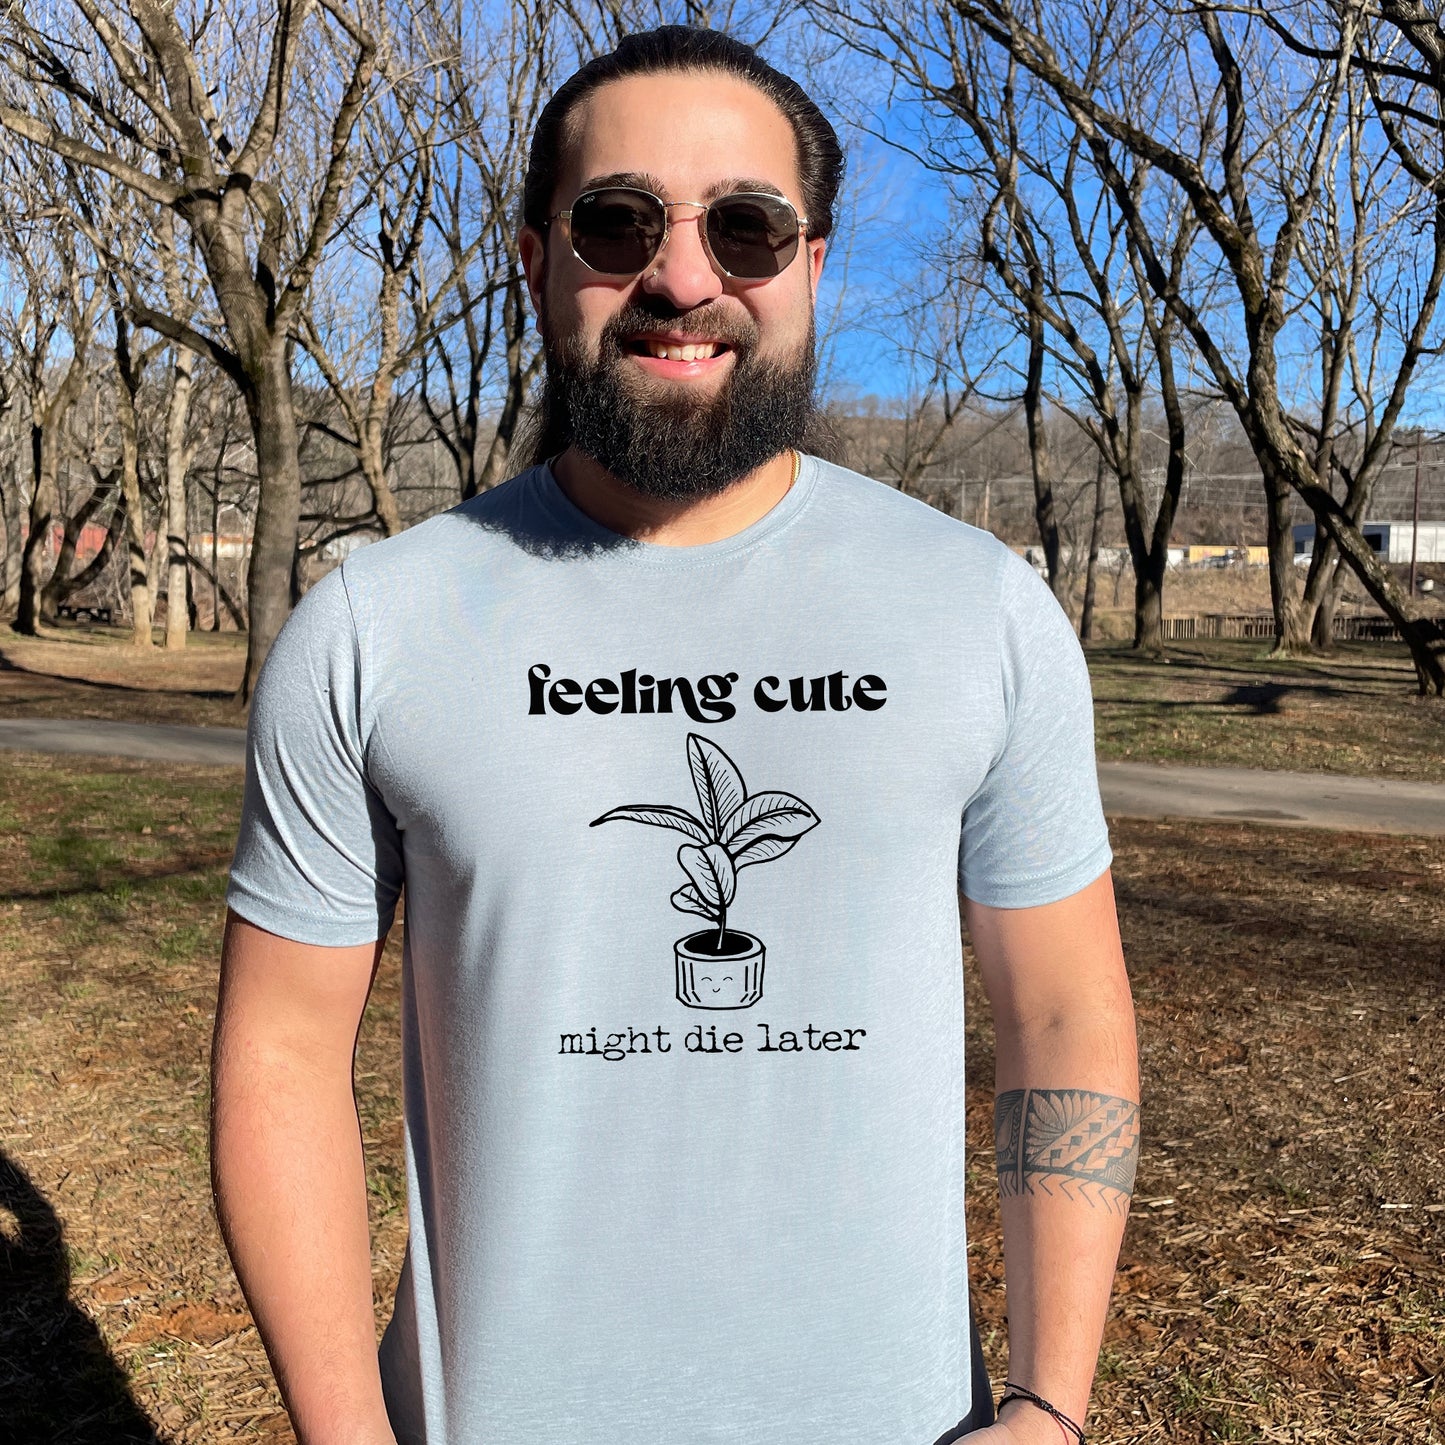 a man with a beard wearing a t - shirt that says teething cute